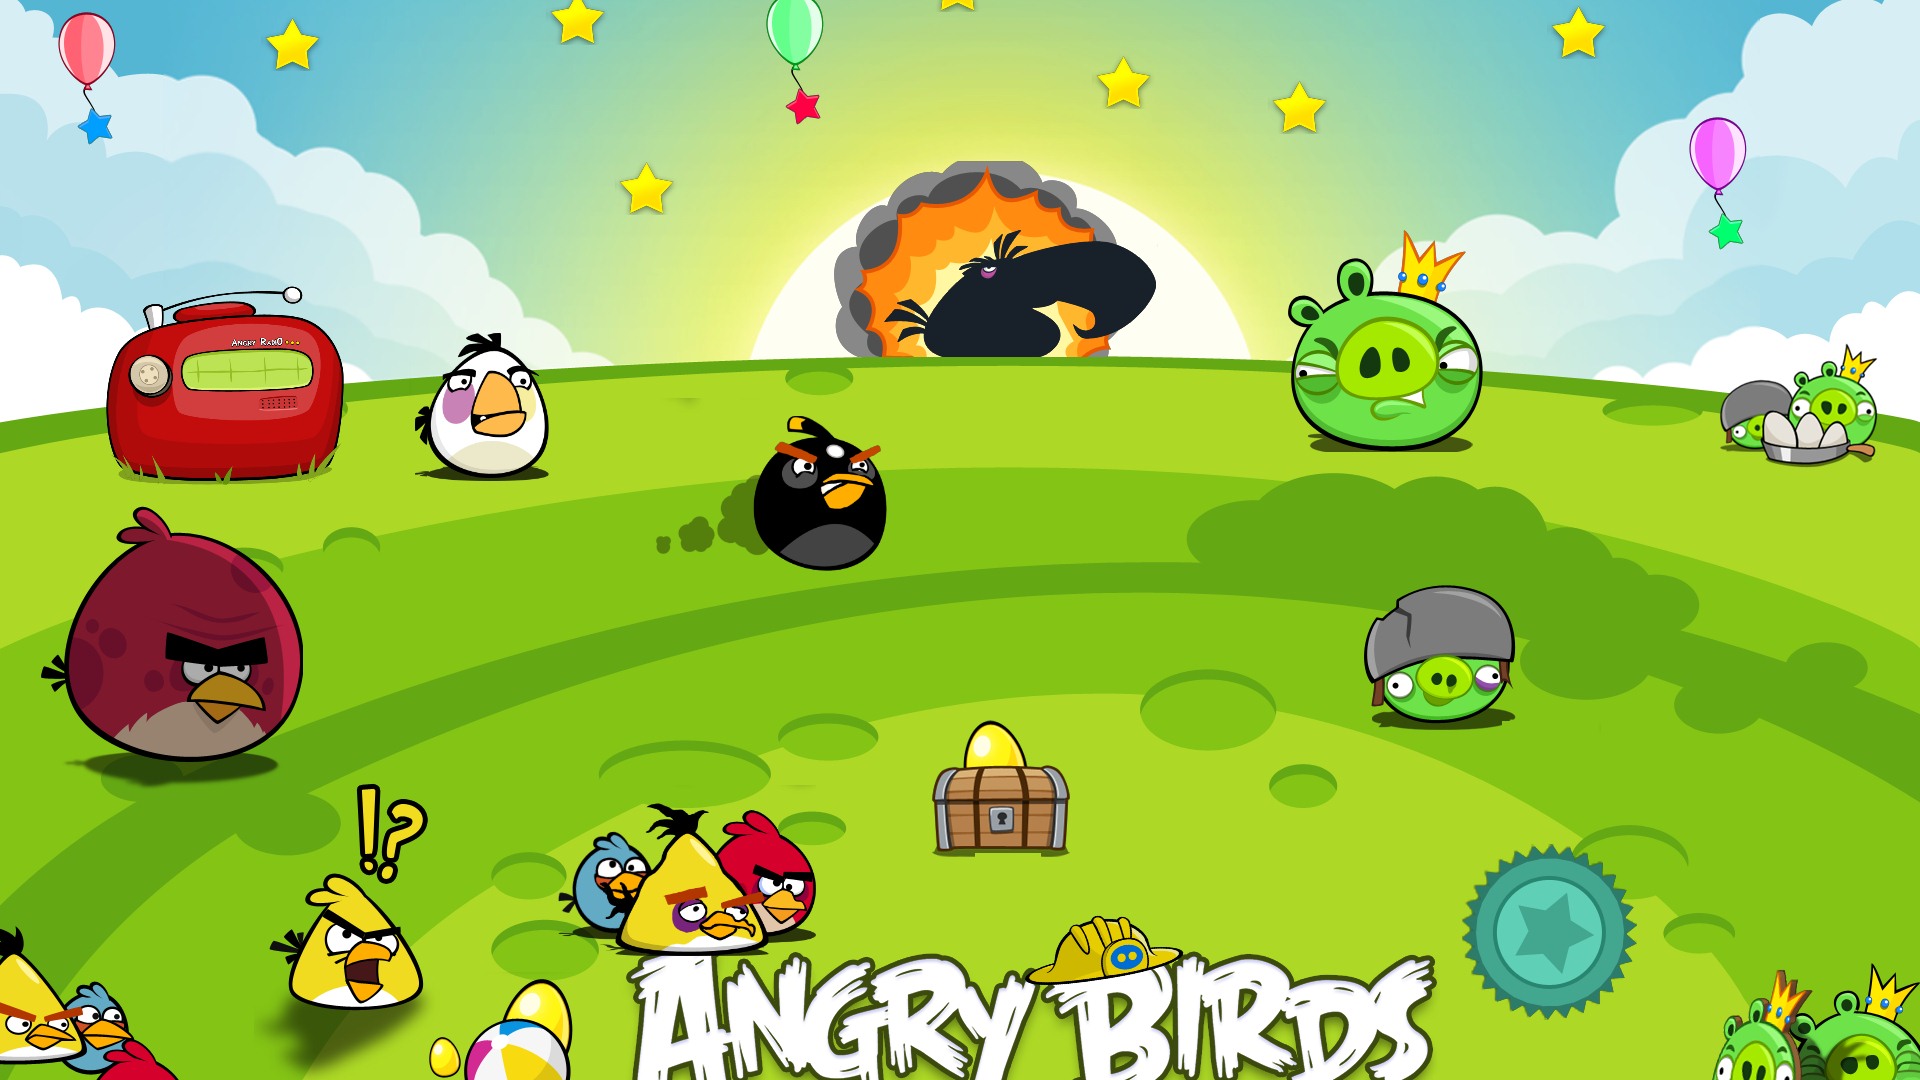 Angry Birds Game Wallpapers #12 - 1920x1080